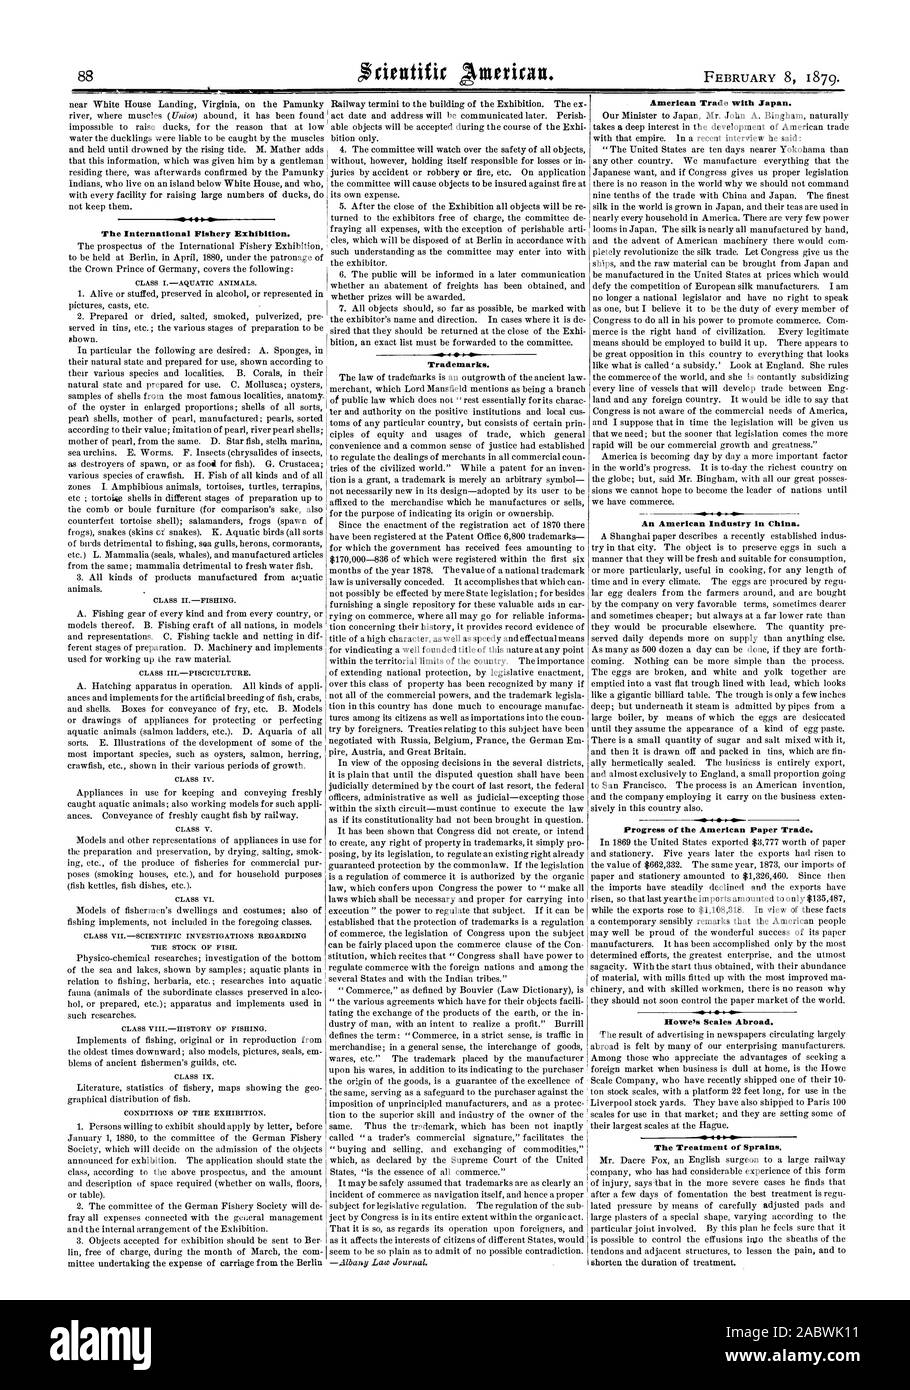 VI The International Fishery Exhibition. CLASS IAQUATIC ANIMALS. CLASS IIFISHING. CLASS IIIPISCICULTURE. CLASS IV. CLASS V. CLASS VI. CLASS VIISCIENTIFIC INVESTIGATIONS REGARDING THE STOCK OF FISH. CLASS VIIIHISTORY OF FISHING. CONDITIONS OF THE EXHIBITION. Trademarks. American Trade with Japan. An American Industry in China. Progress of the American Paper Trade. Howe's Scales Abroad. The Treatment of Sprains., scientific american, 1879-02-08 Stock Photo